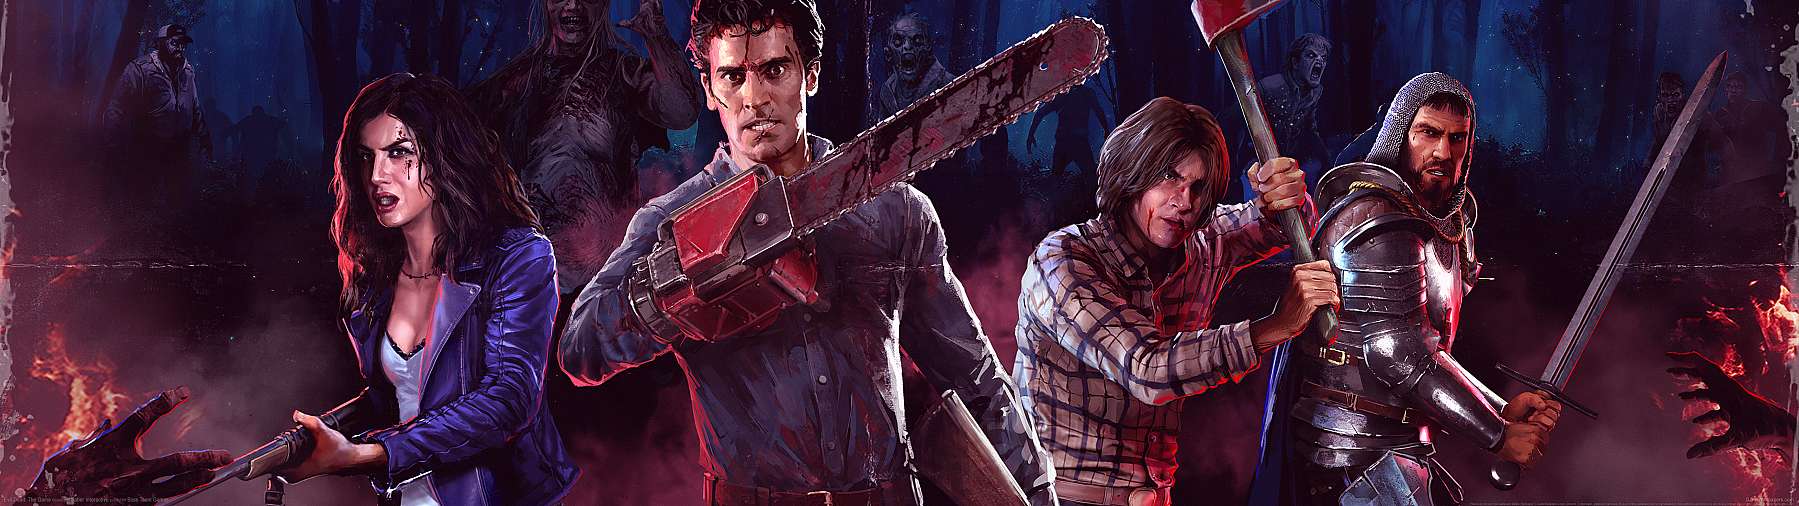 Evil Dead: The Game superwide achtergrond 01